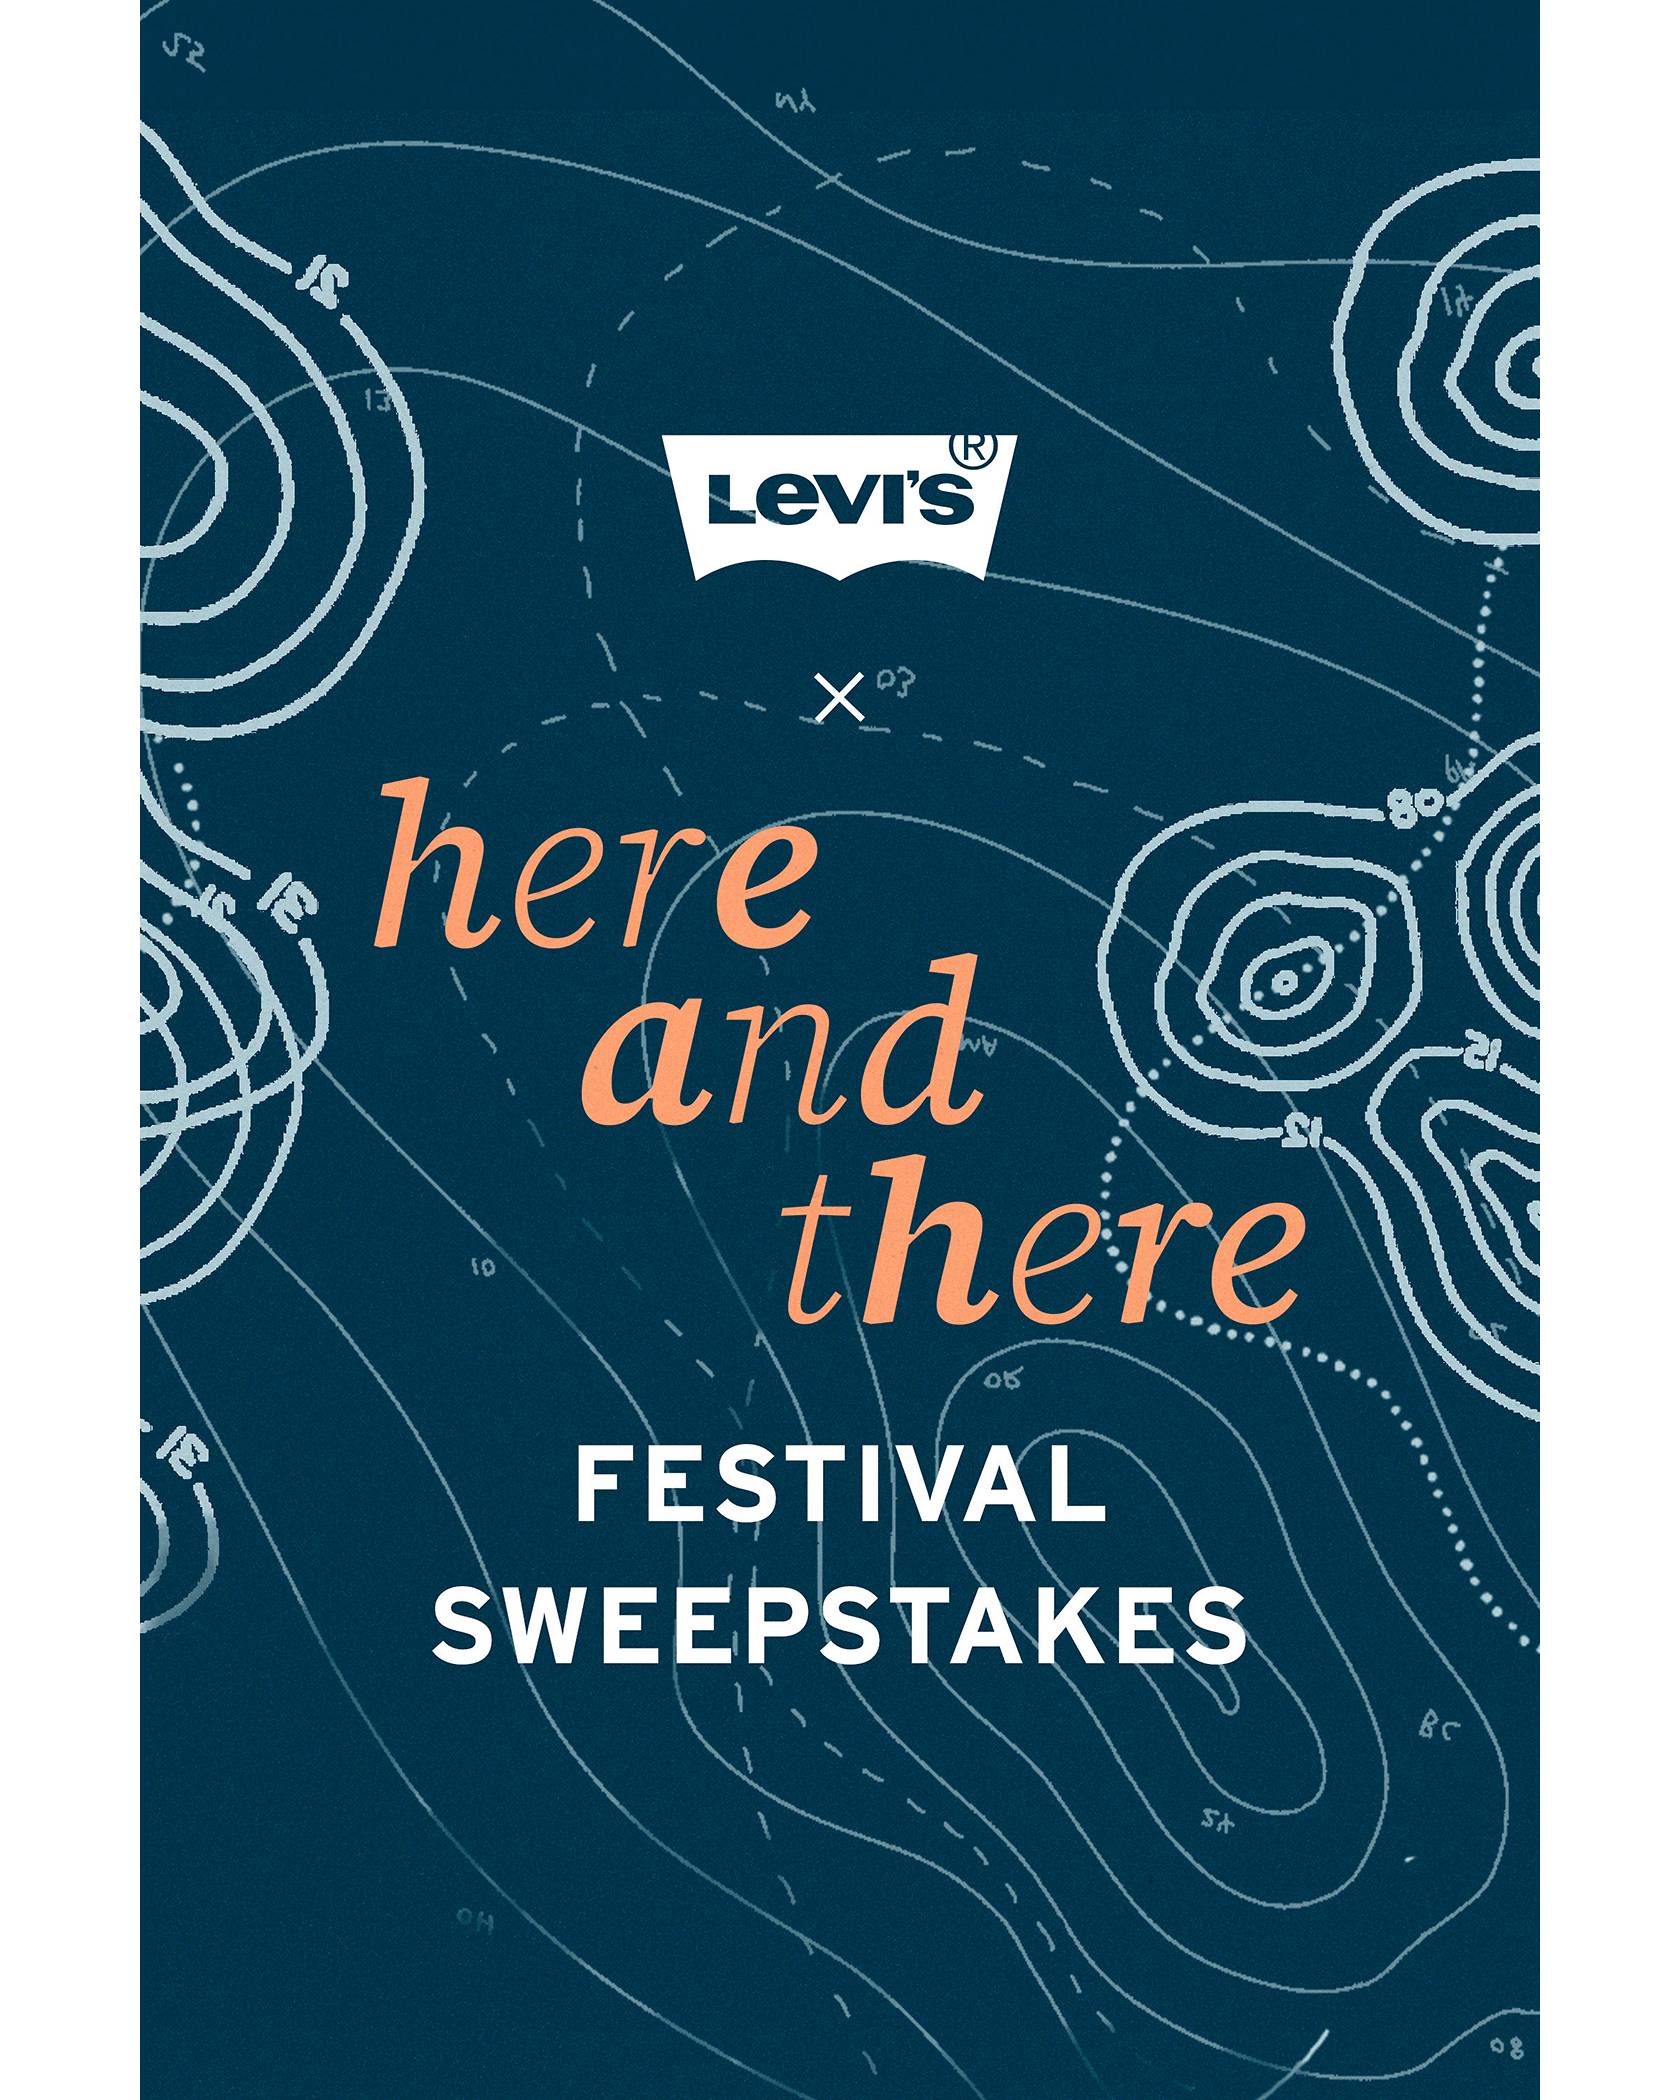 Levi's x Here and There Festival Sweepstakes